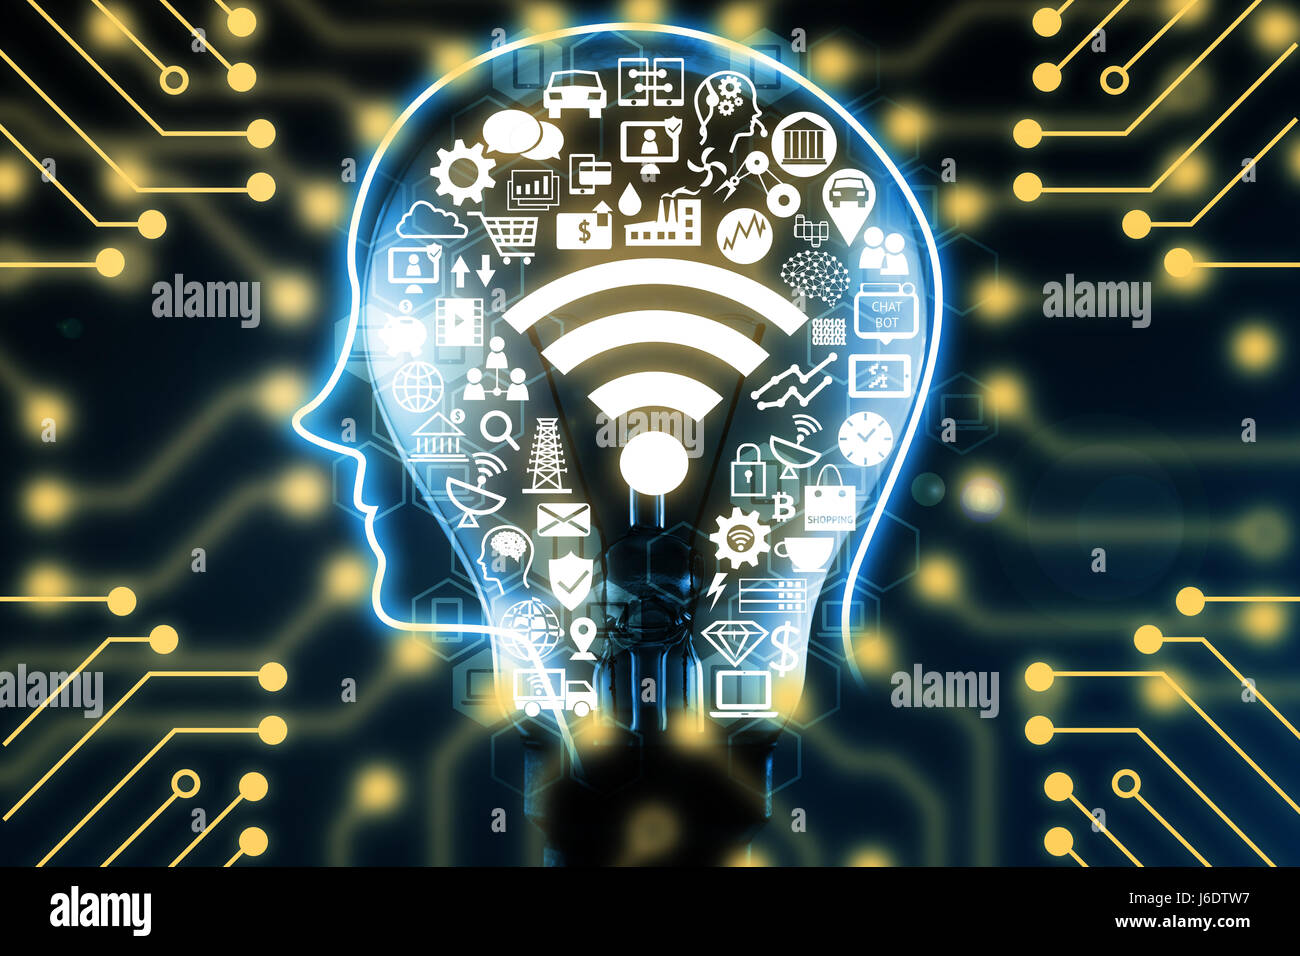 Internet of things (IoT) and digital lifestyle concept . Light bulb, wifi icons and Electric circuits graphic background with Infographic Stock Photo